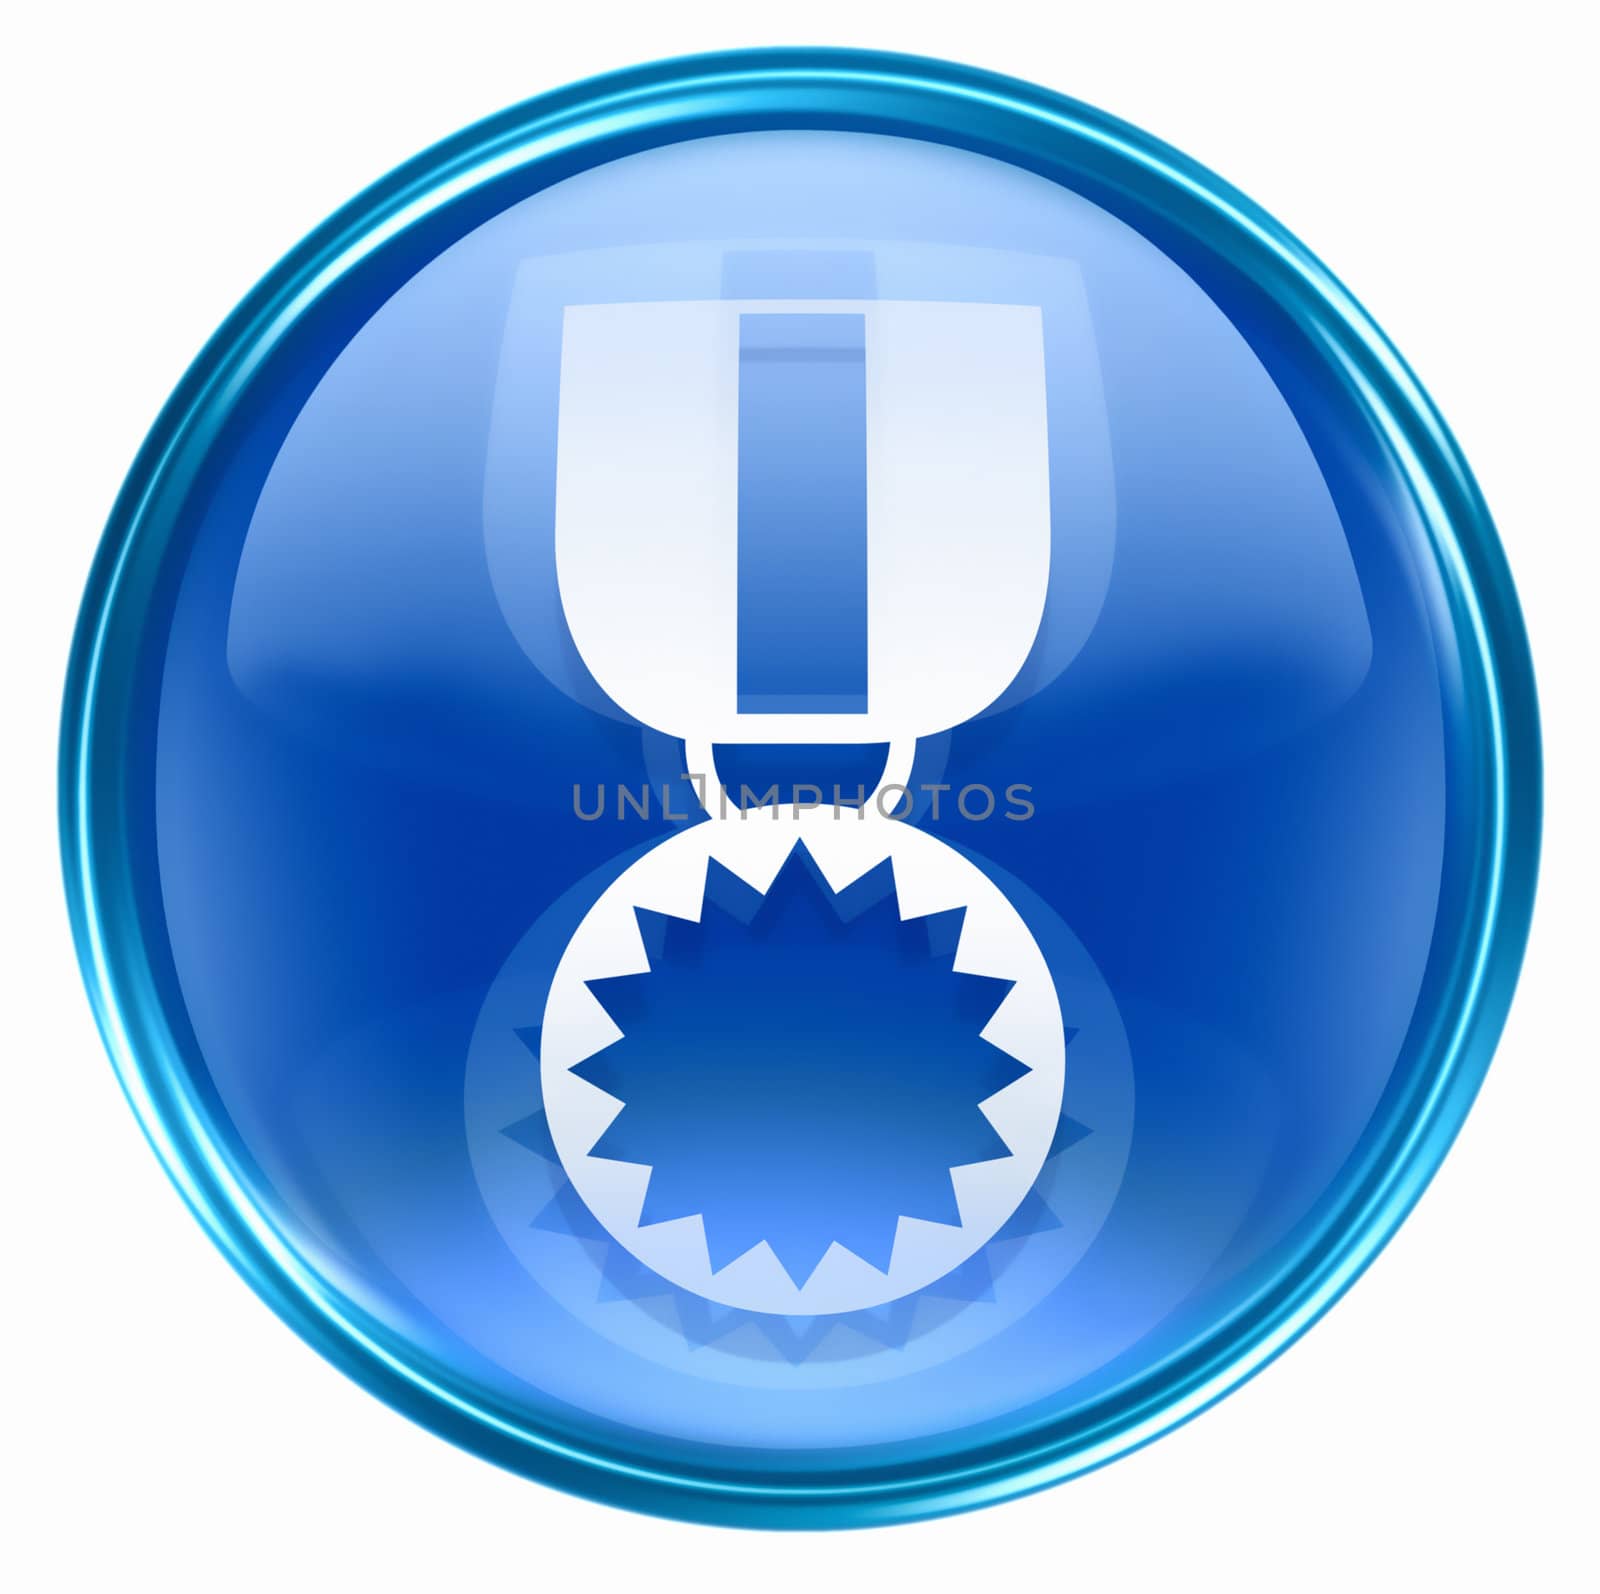  medal icon blue, isolated on white background. by zeffss